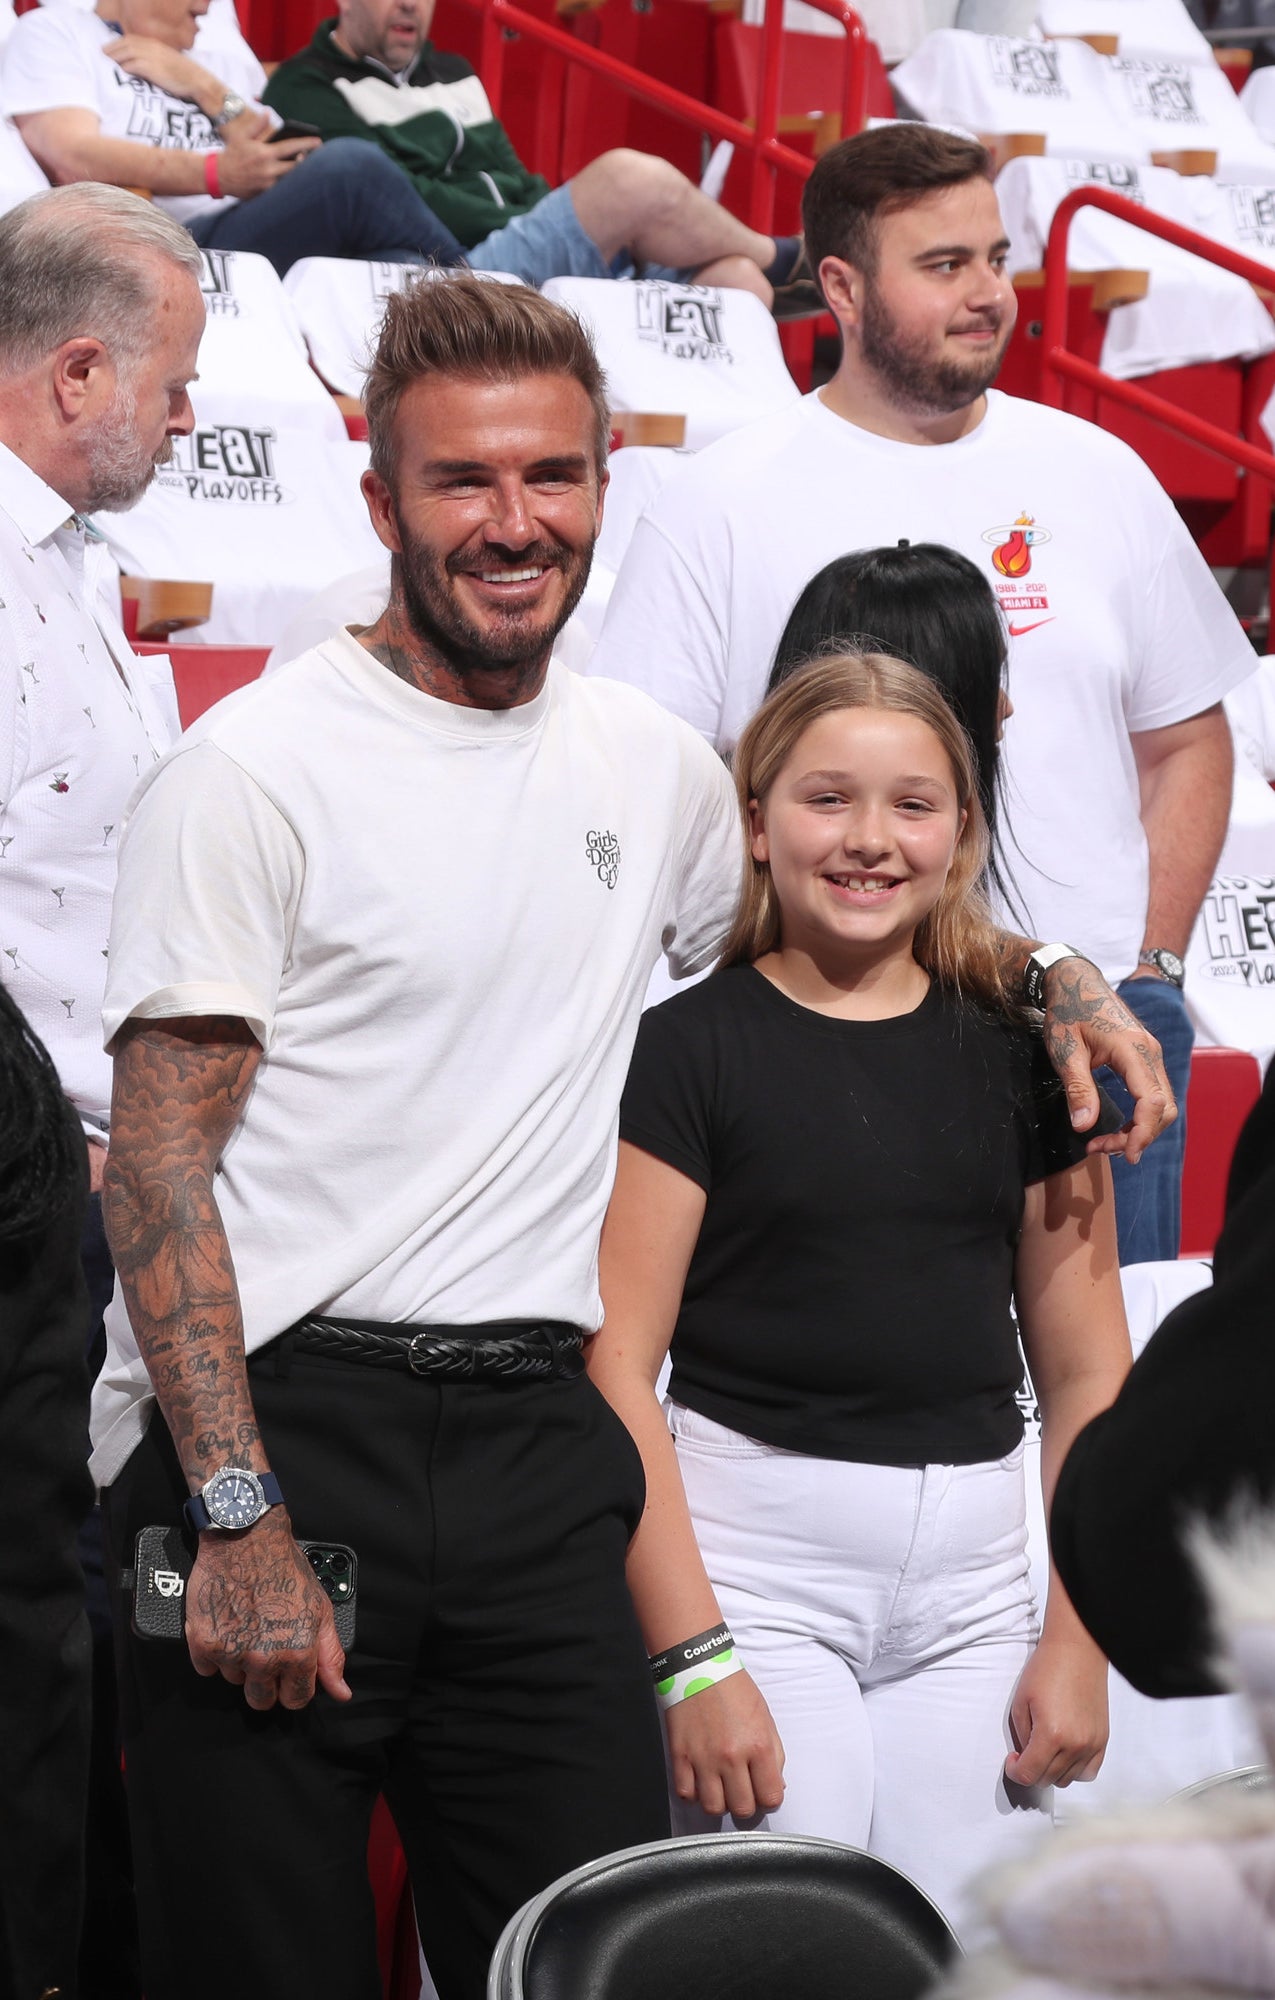 David Beckham and daughter Harper attending a Miami Heat game in black and white outfits